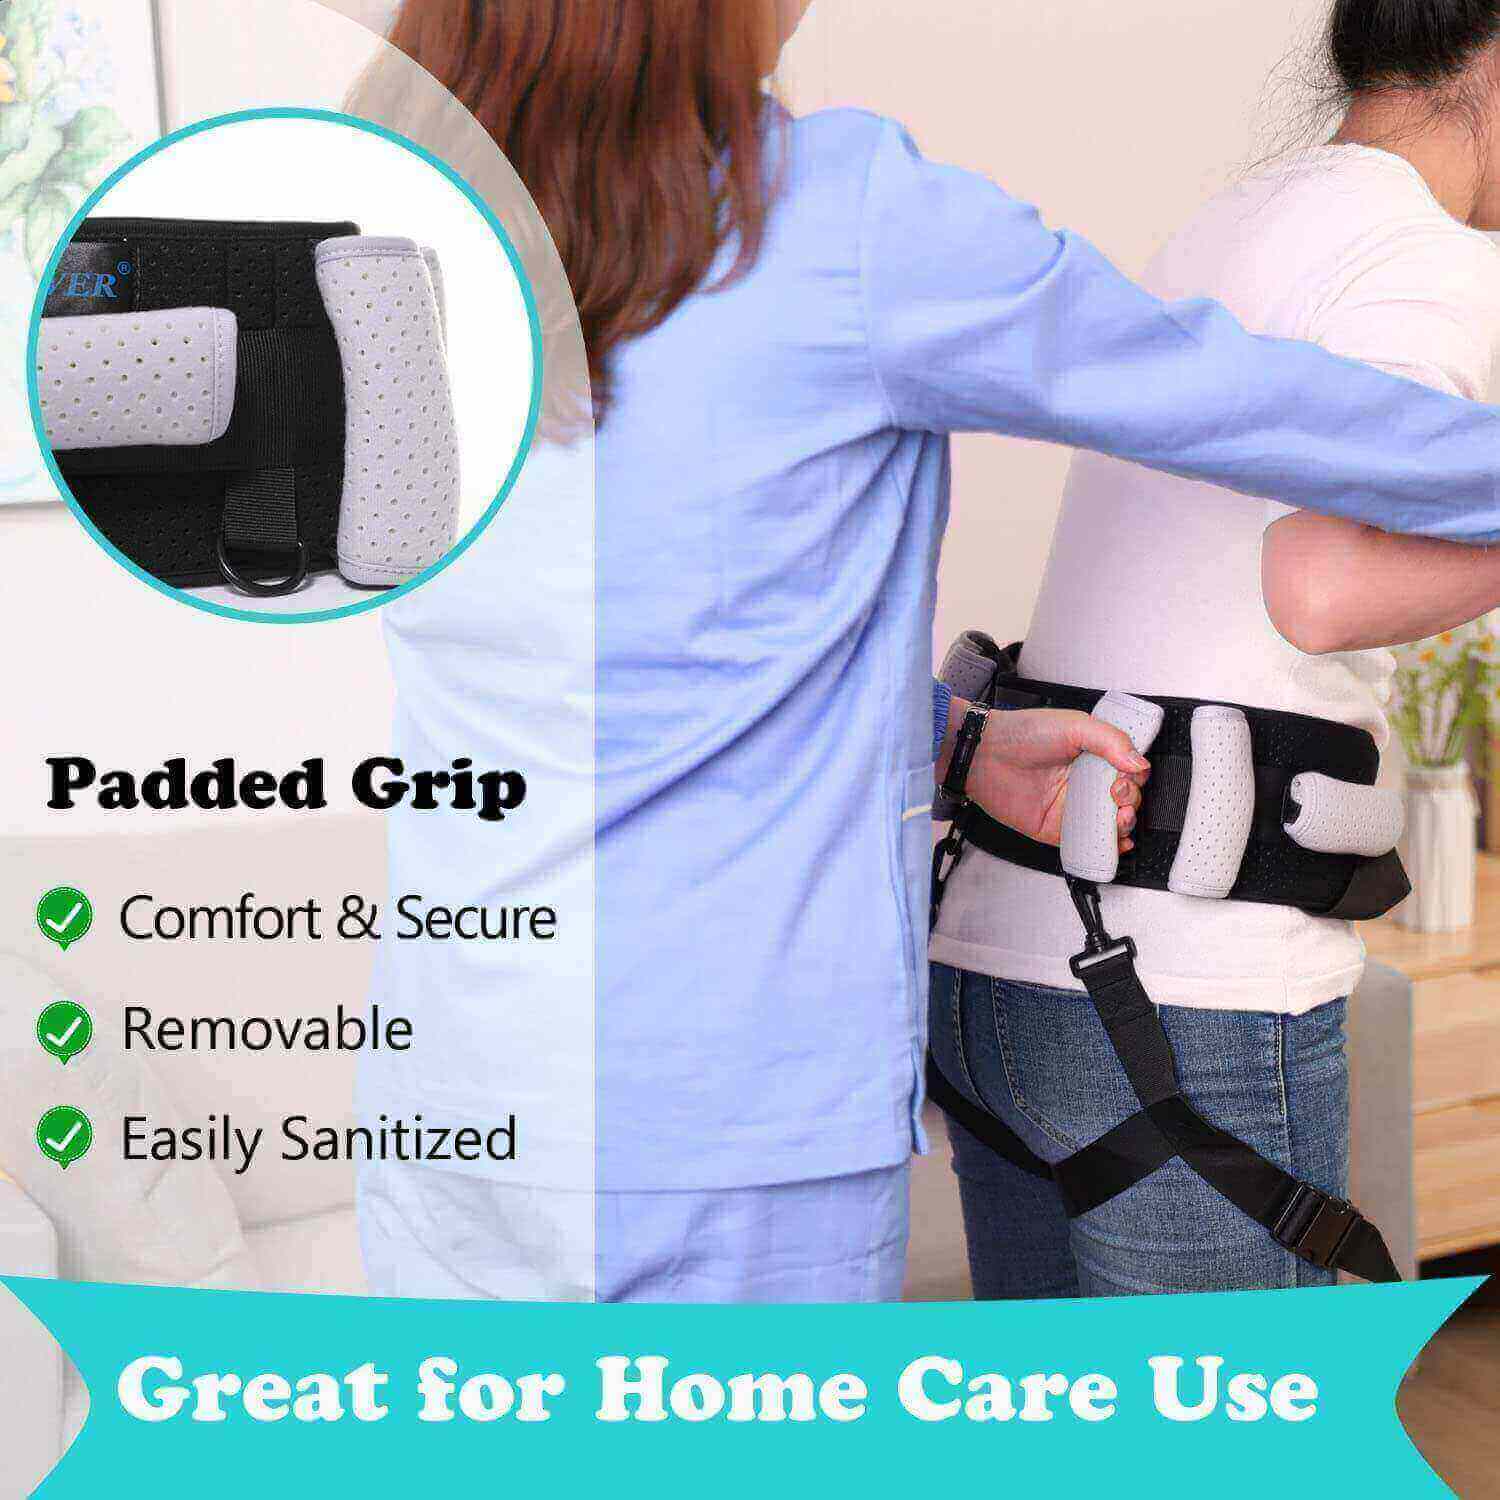 Fanwer transfer gait belt with handles & leg straps for transfer aids, one is helping the other walk